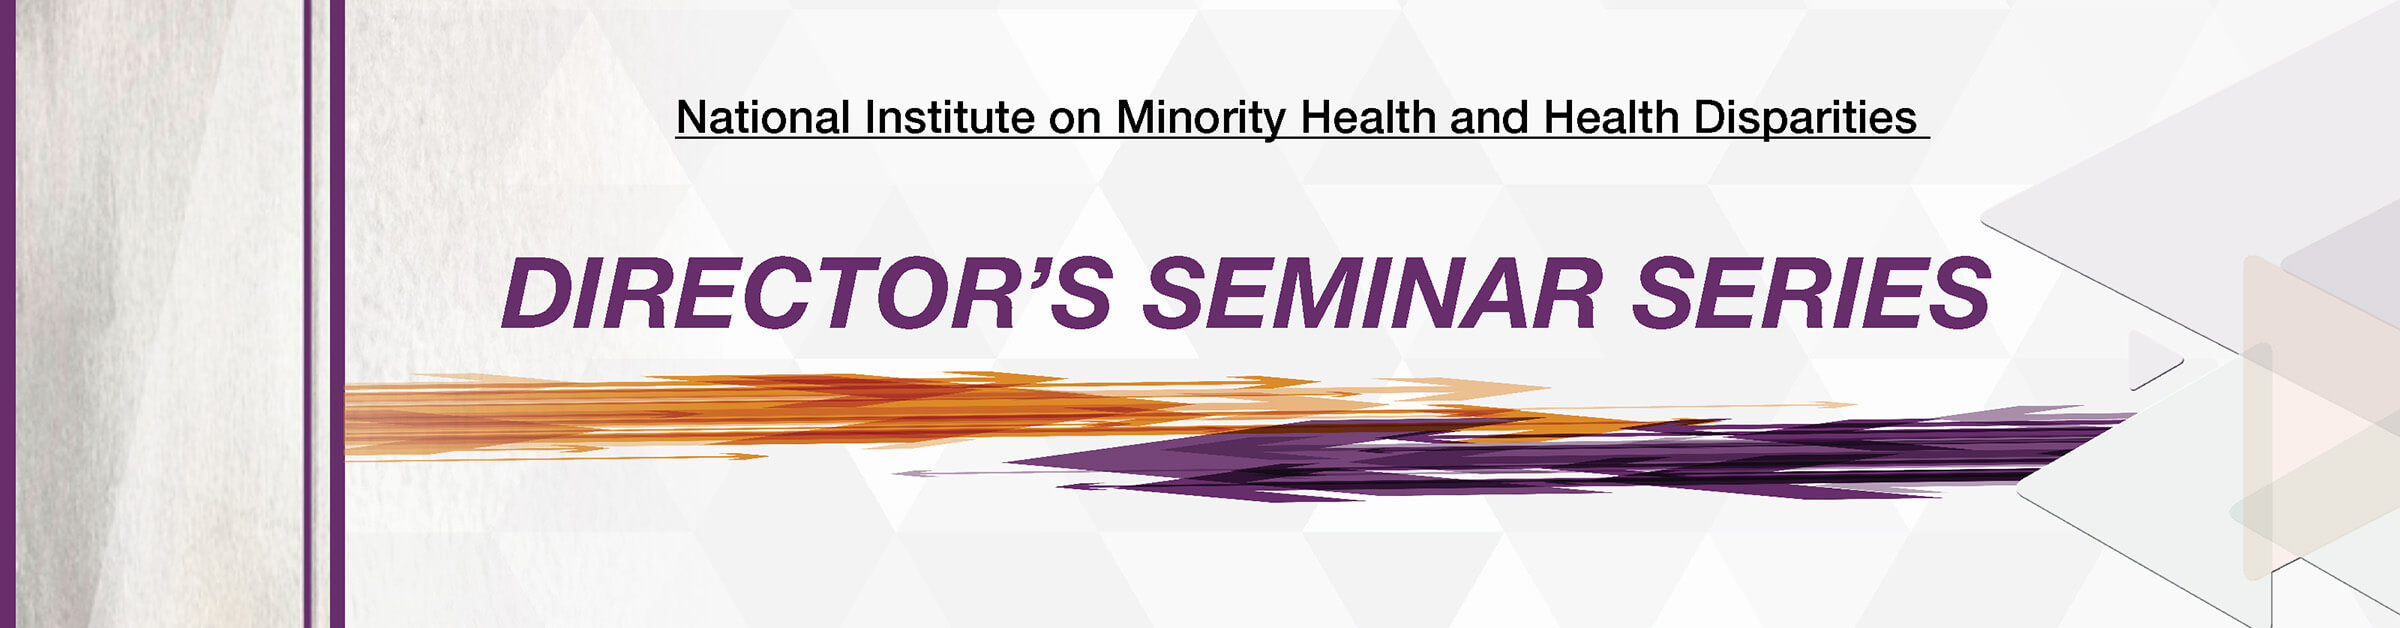 Text: National Institute on Minority Health and Health Disparities Director’s Seminar Series. Below: Abstract brush strokes of shades of purple and orange